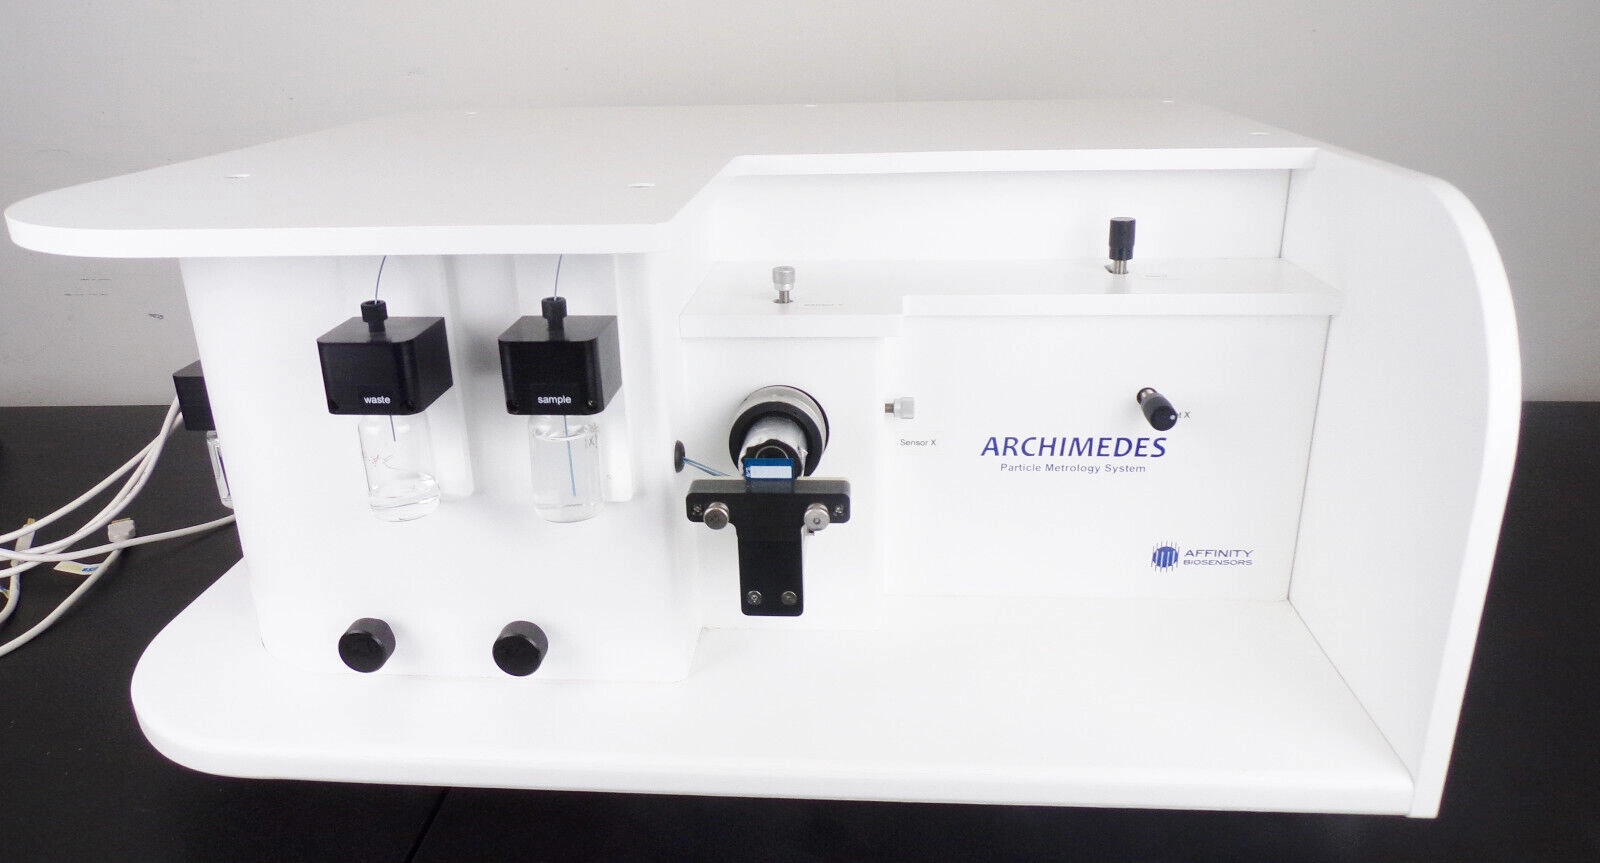 Malvern Archimedes Particle Metrology System with 